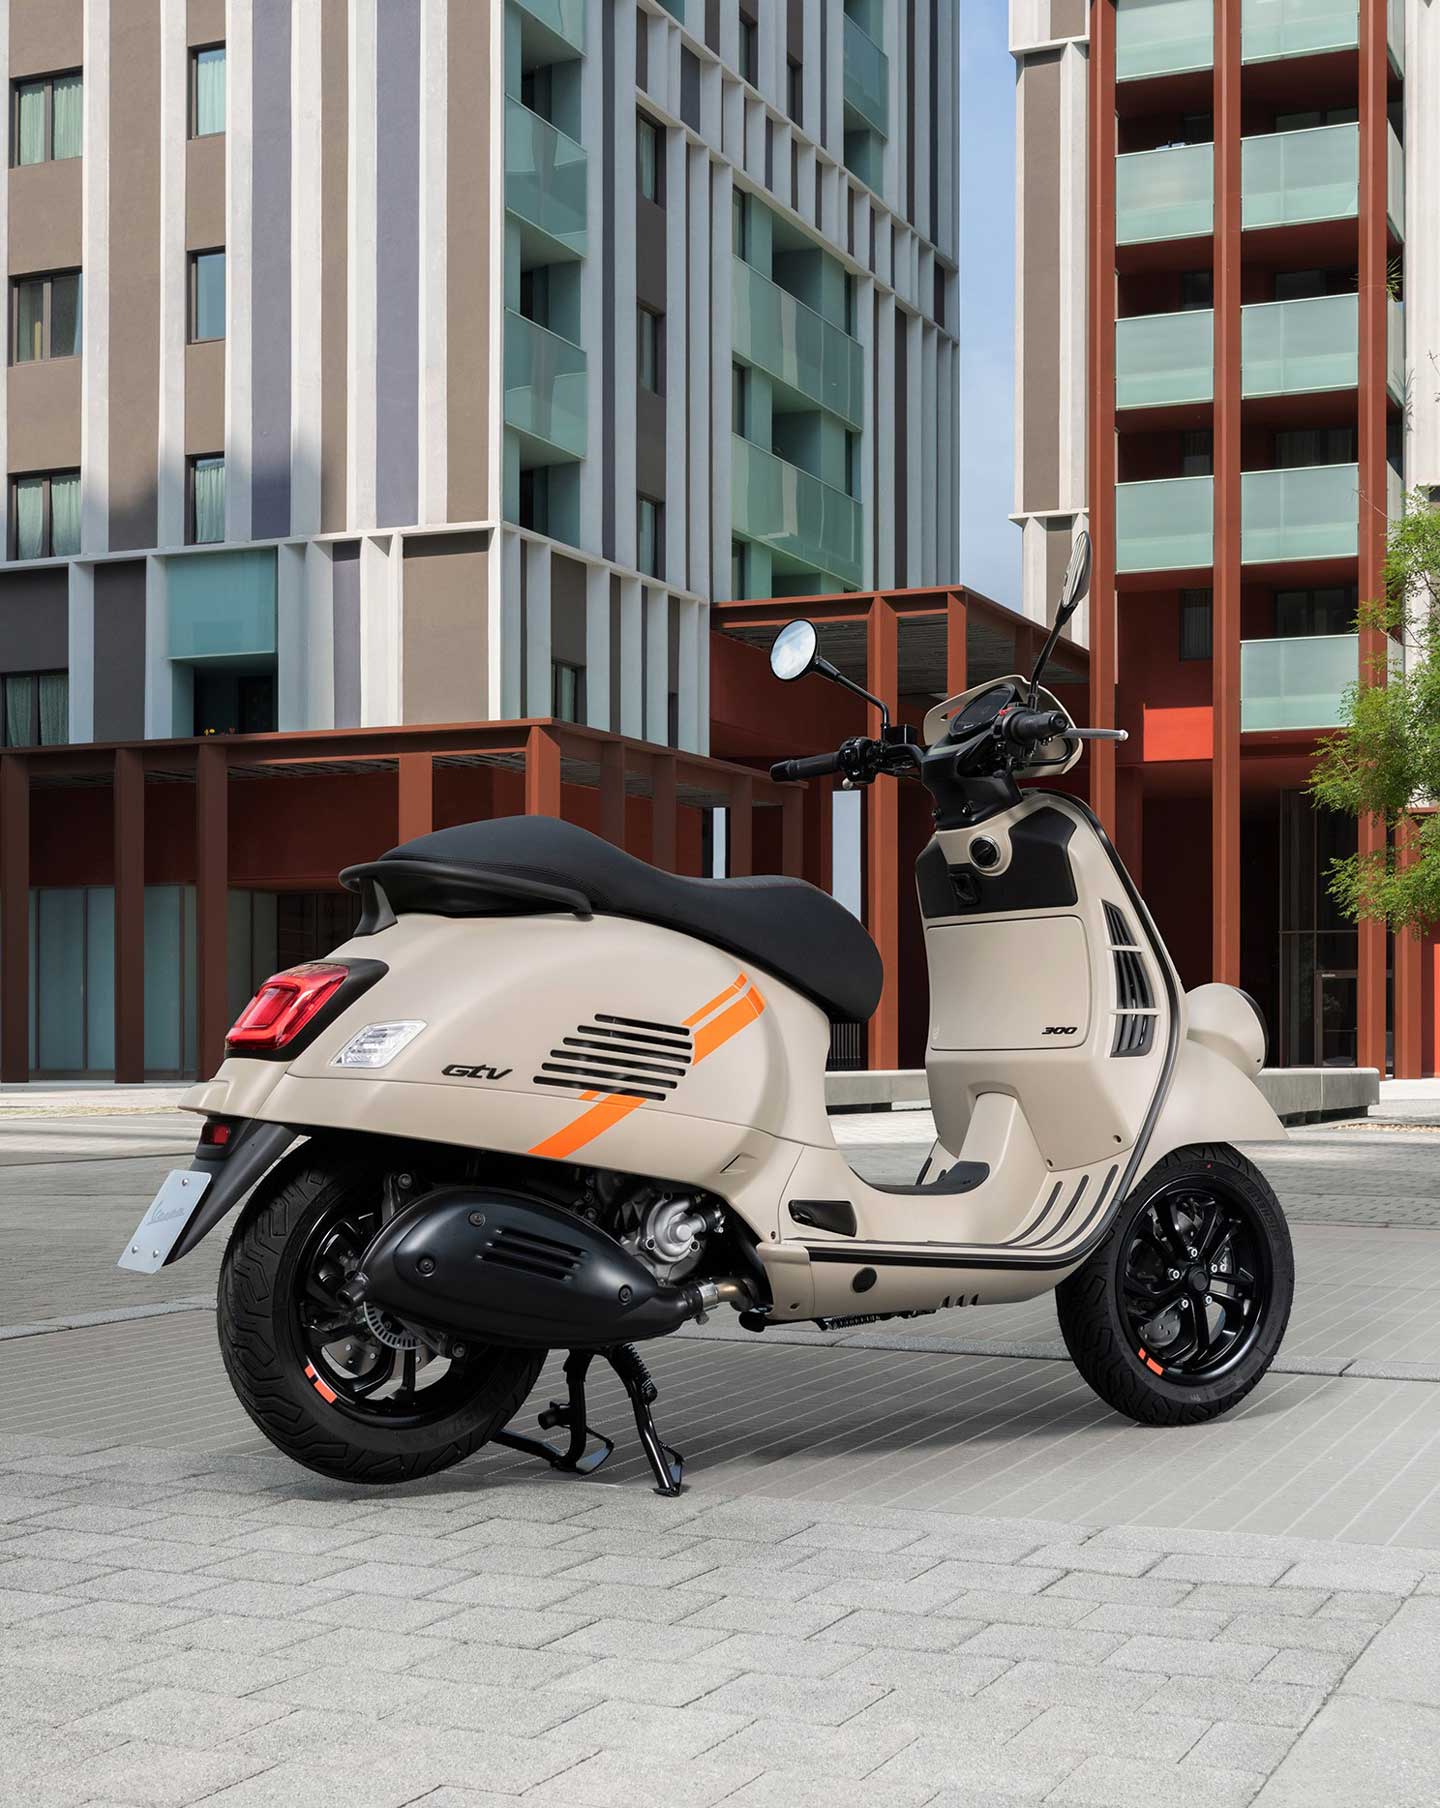 The new GTV is the most powerful production Vespa ever produced